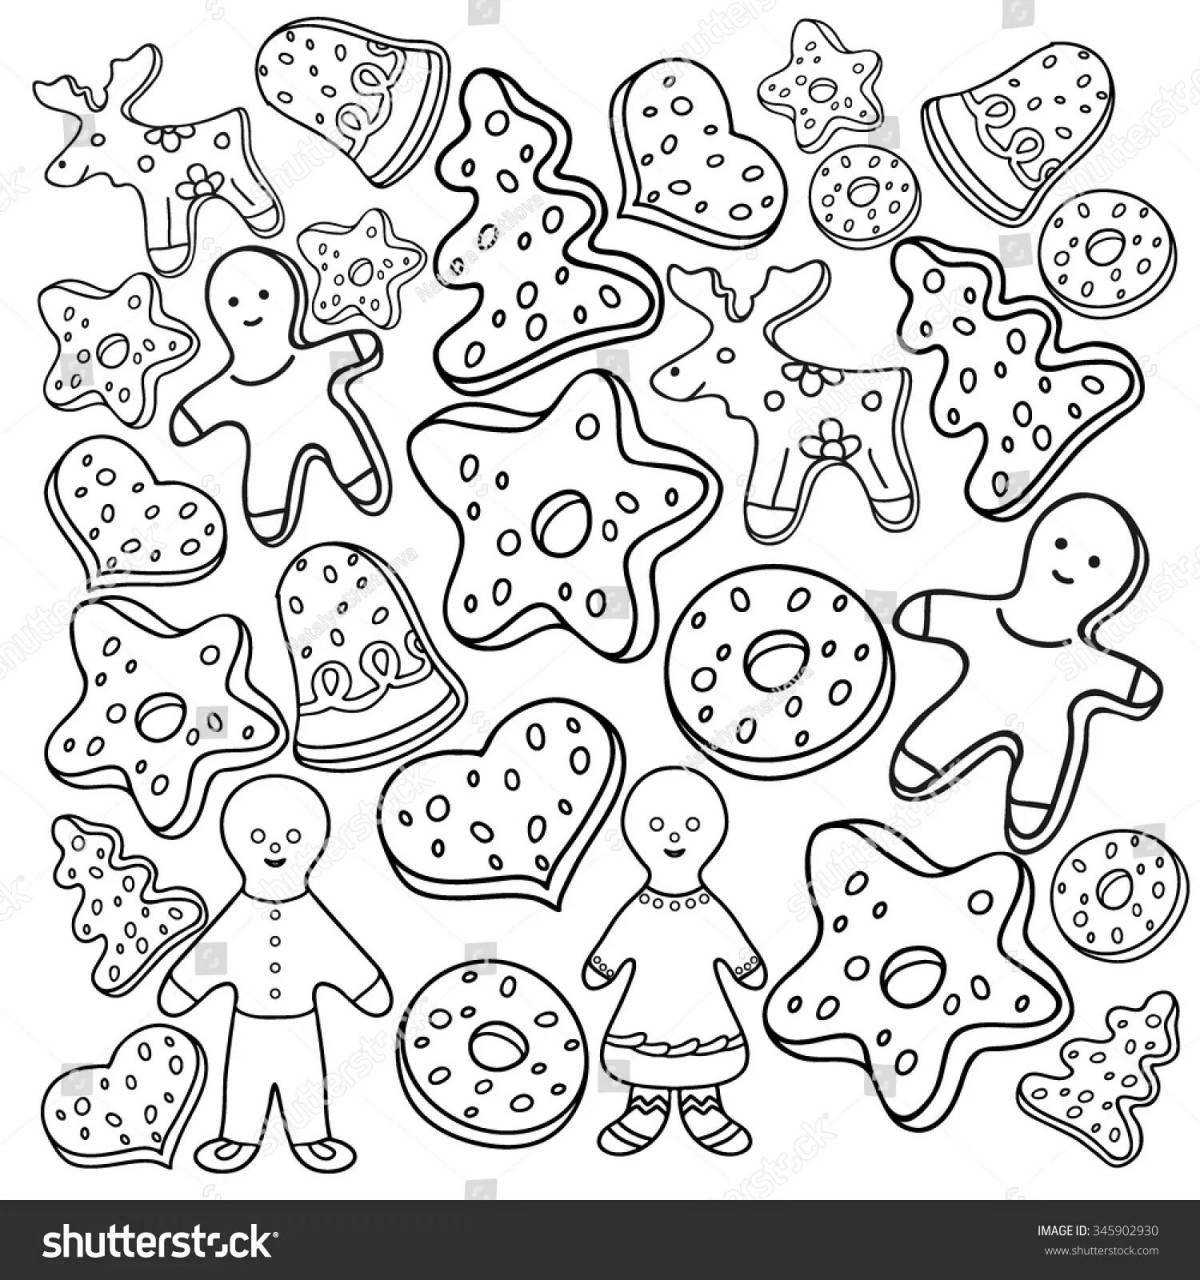 Amazing gingerbread coloring pages for kids